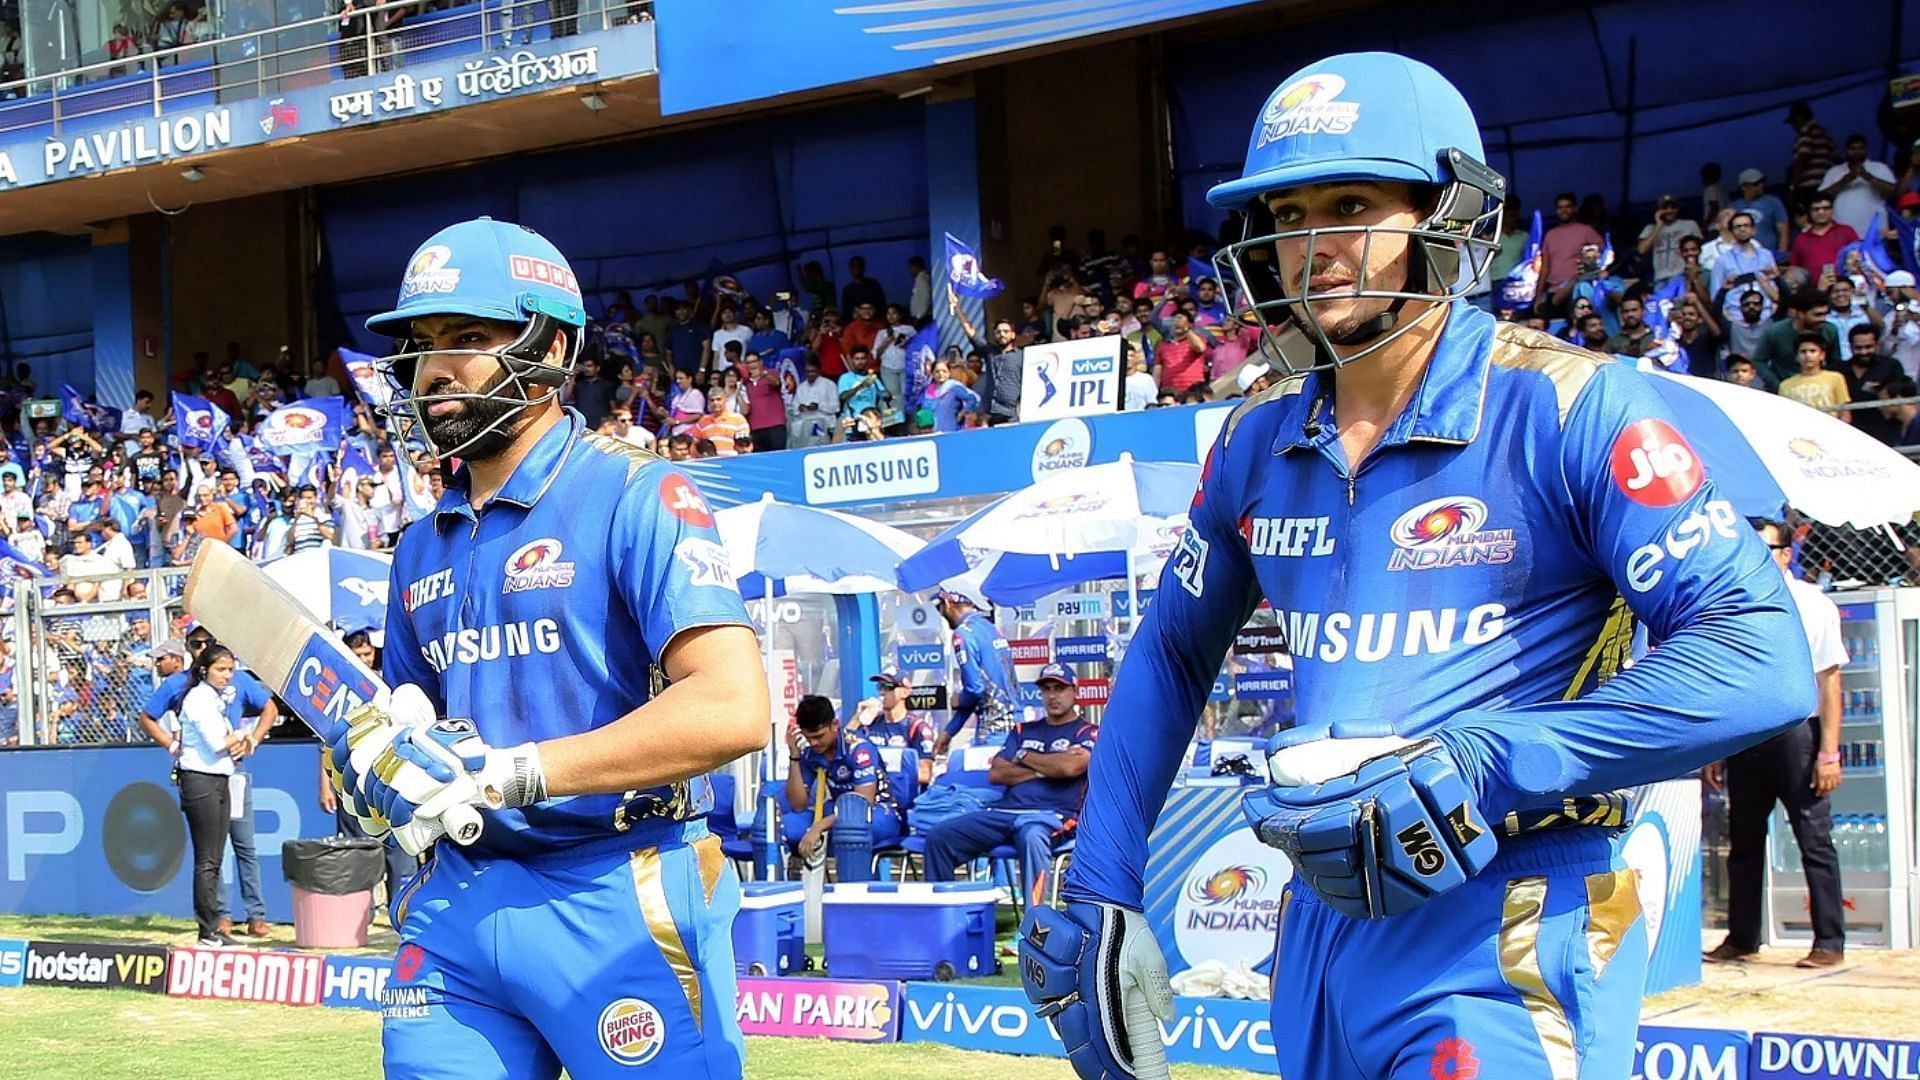 Quinton de Kock (right) and Rohit Sharma (left) have opened the batting together for the Mumbai Indians in the IPL. (Image Courtesy: espncricinfo.com)